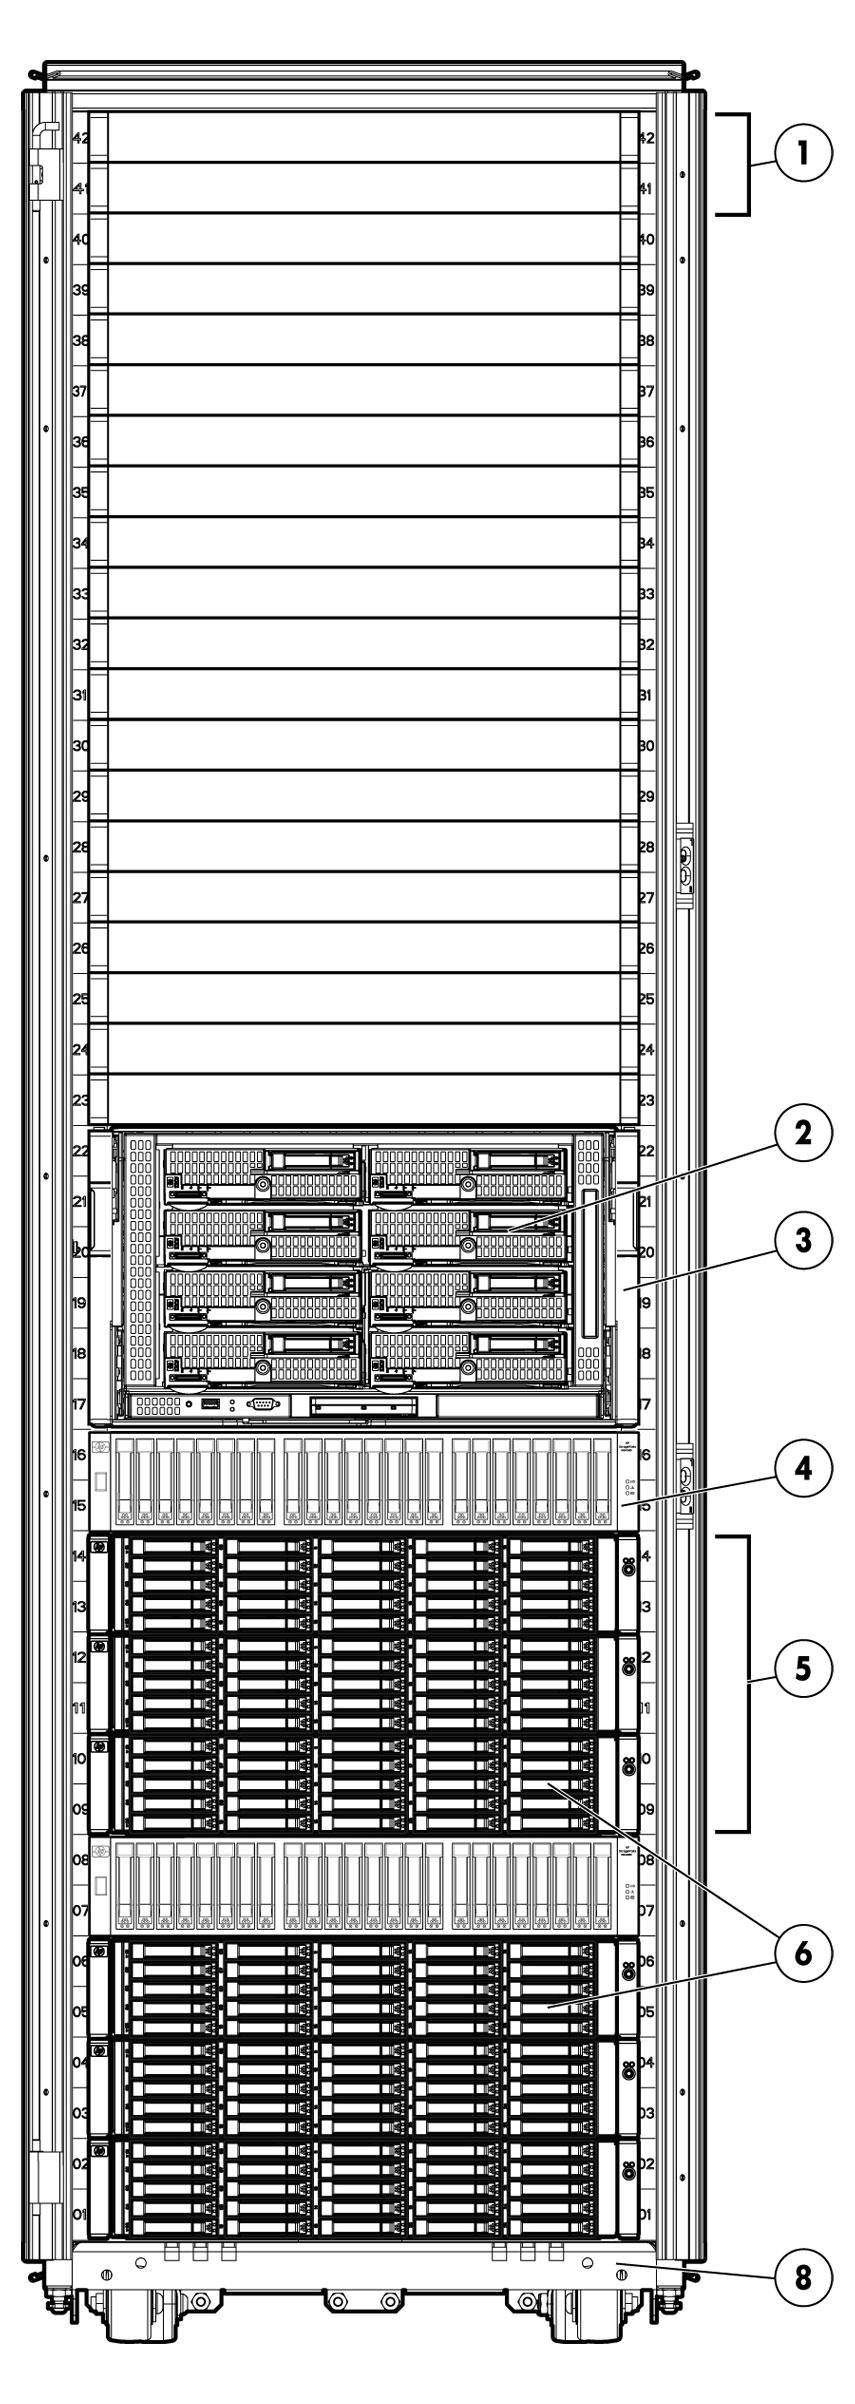 QuickSpecs Overview Base Configuration - Front View 1. HP 6600-24XG 10gigE switches (2) HP Switch 2910-24G (2) 2. HP ProLiant BL465 G7 (4) (8 processors, 96 cores and 1024 GB memory) 3.